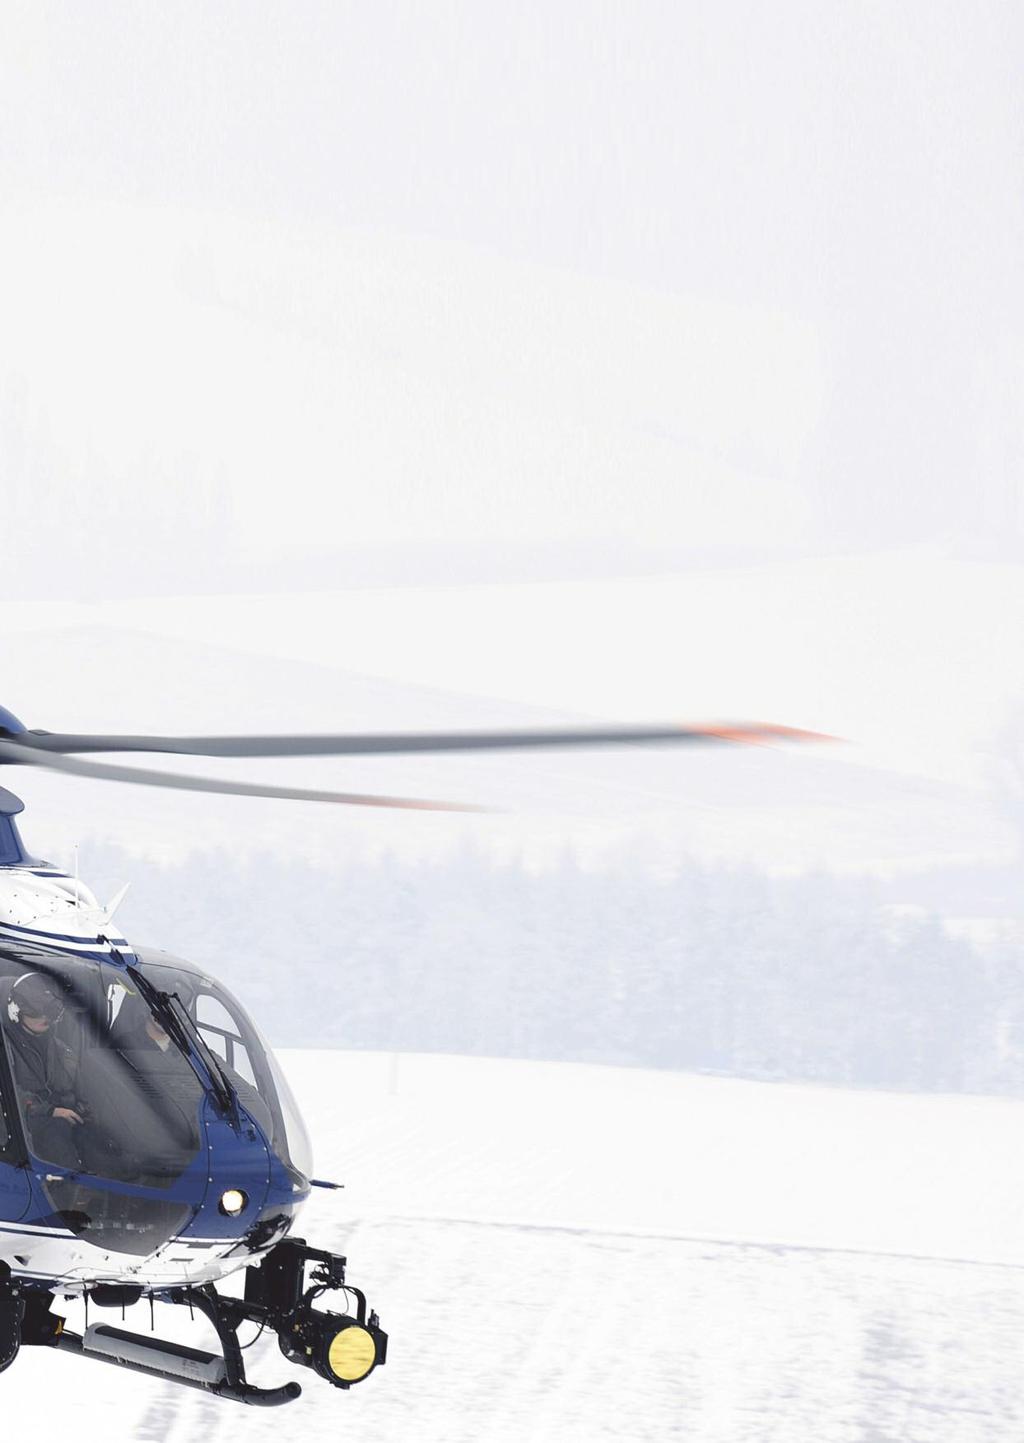 H135 003 Airbus Helicopters lightweight, twin-engine H135 evolution remains top of its class with its distinct combination of optimum performance levels and new, highly attractive features.